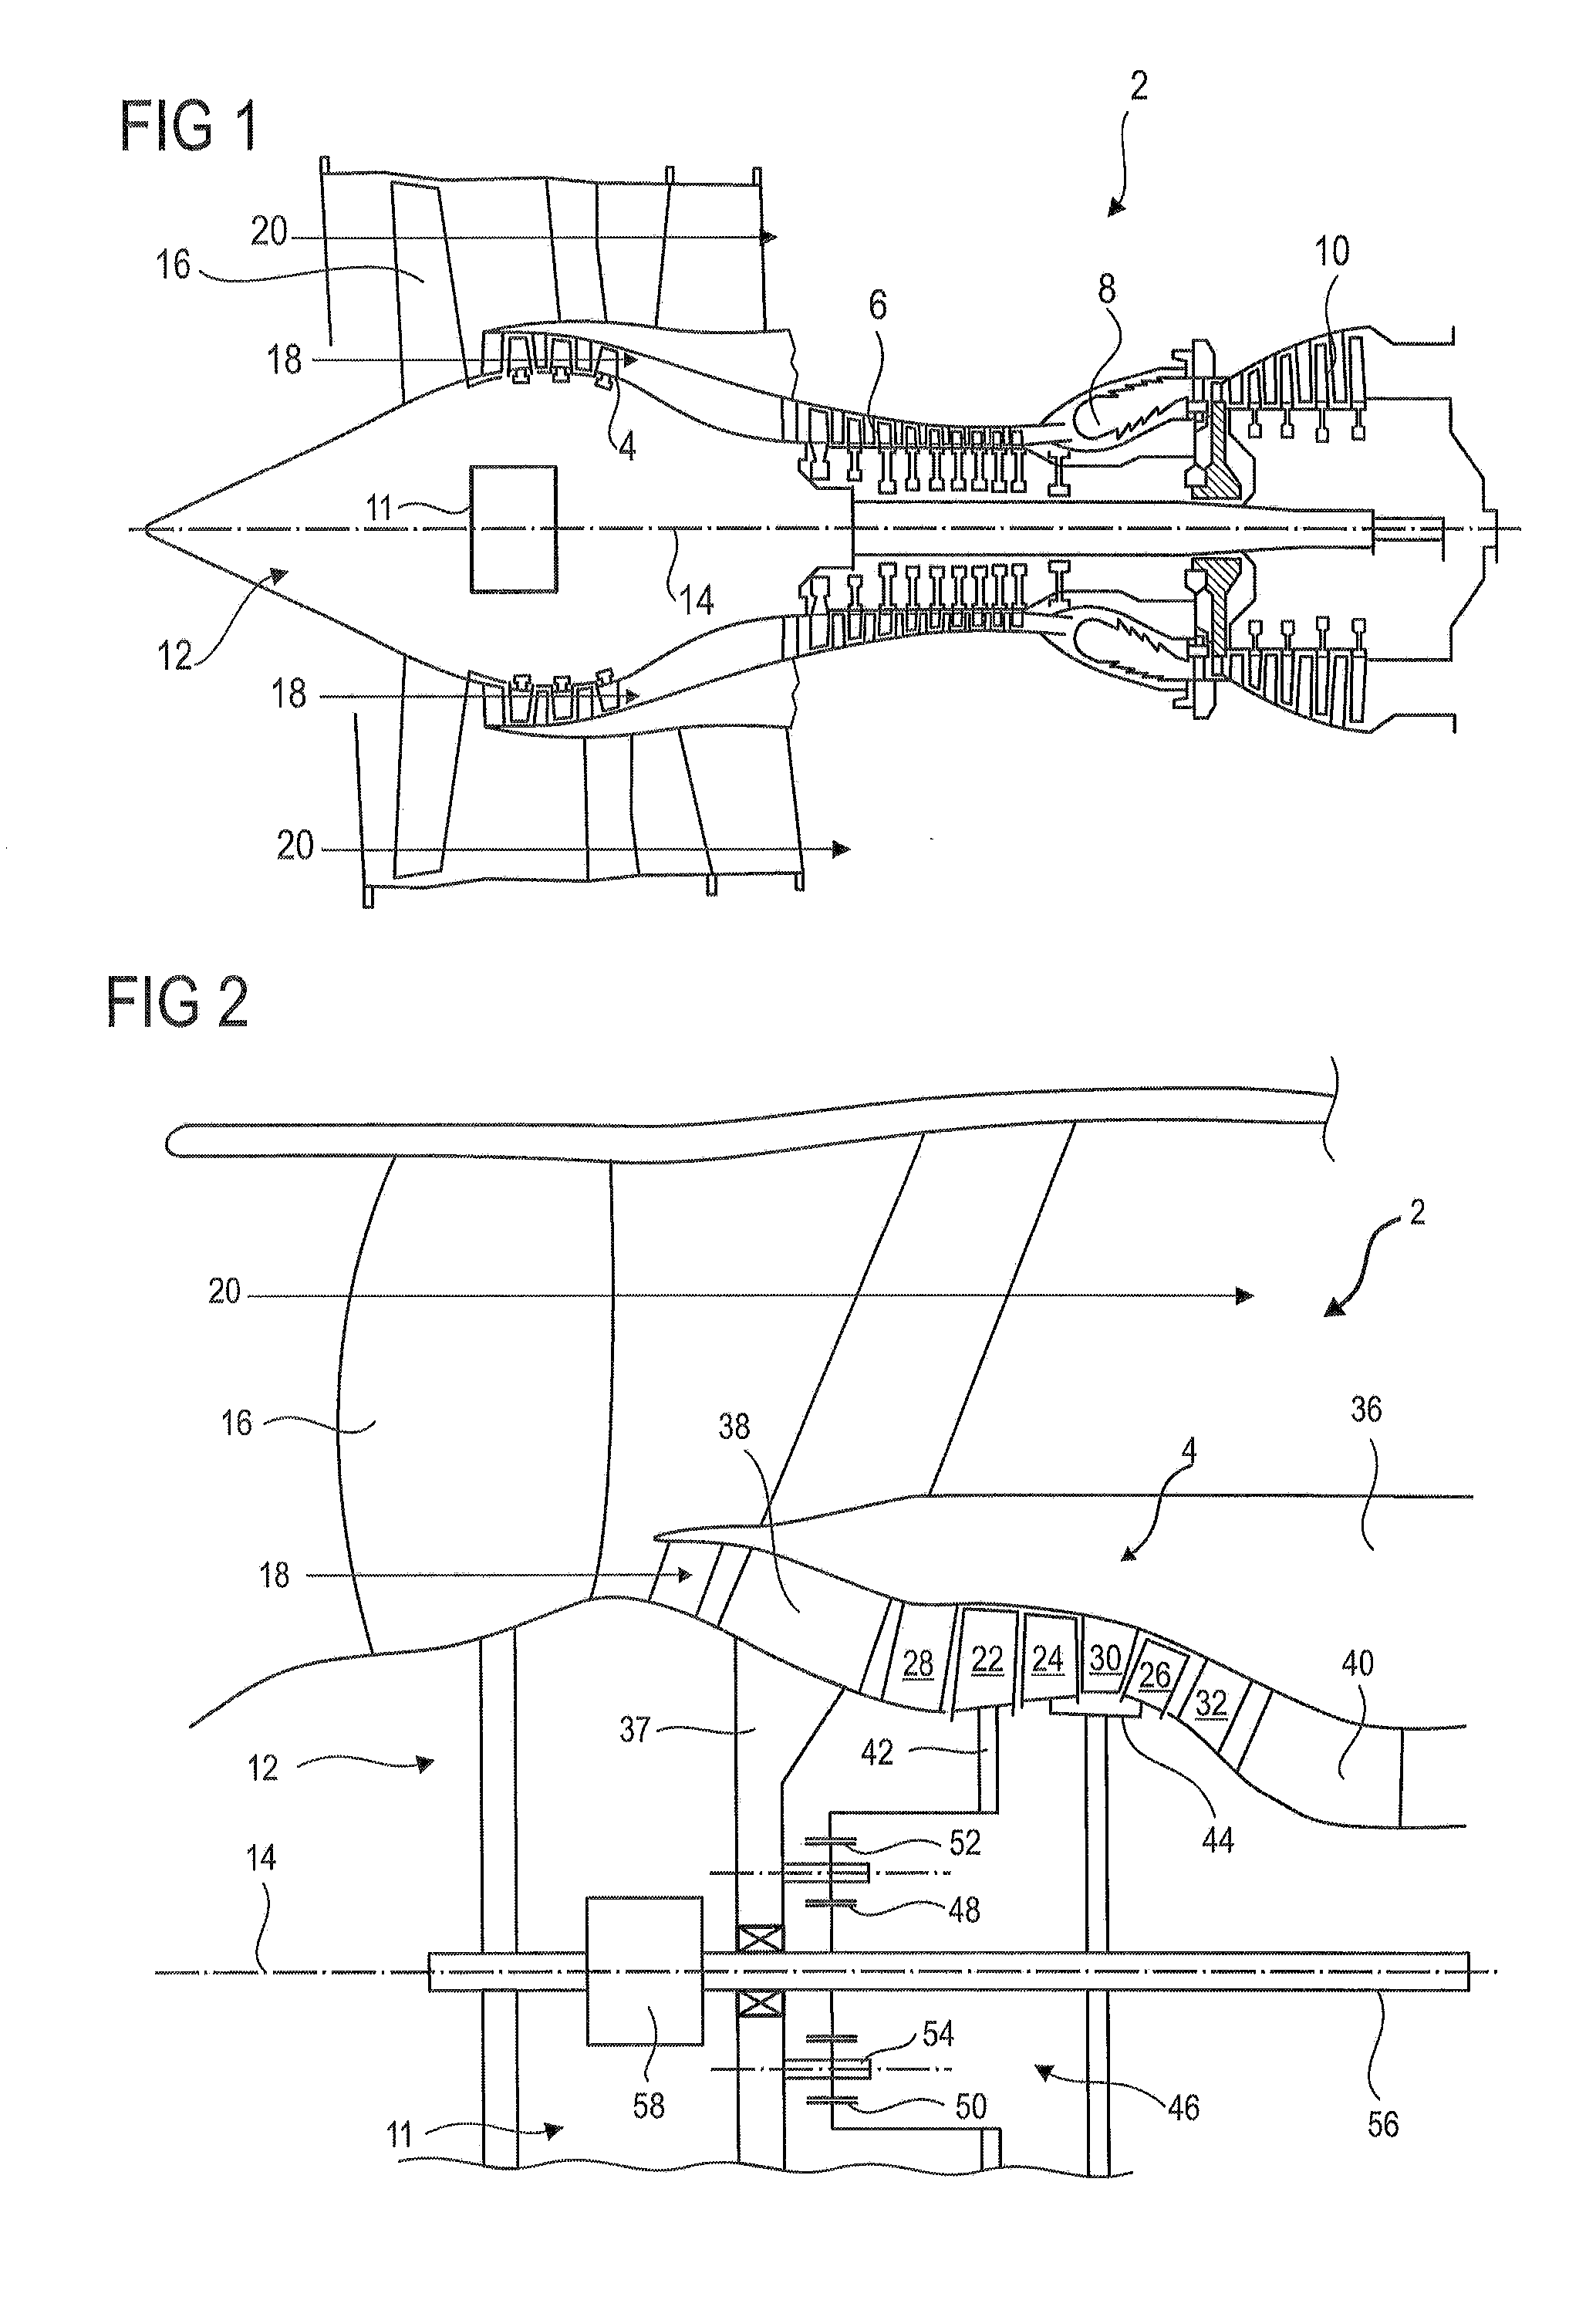 Compressor of Axial Turbine Engine with Contra-Rotating Rotor